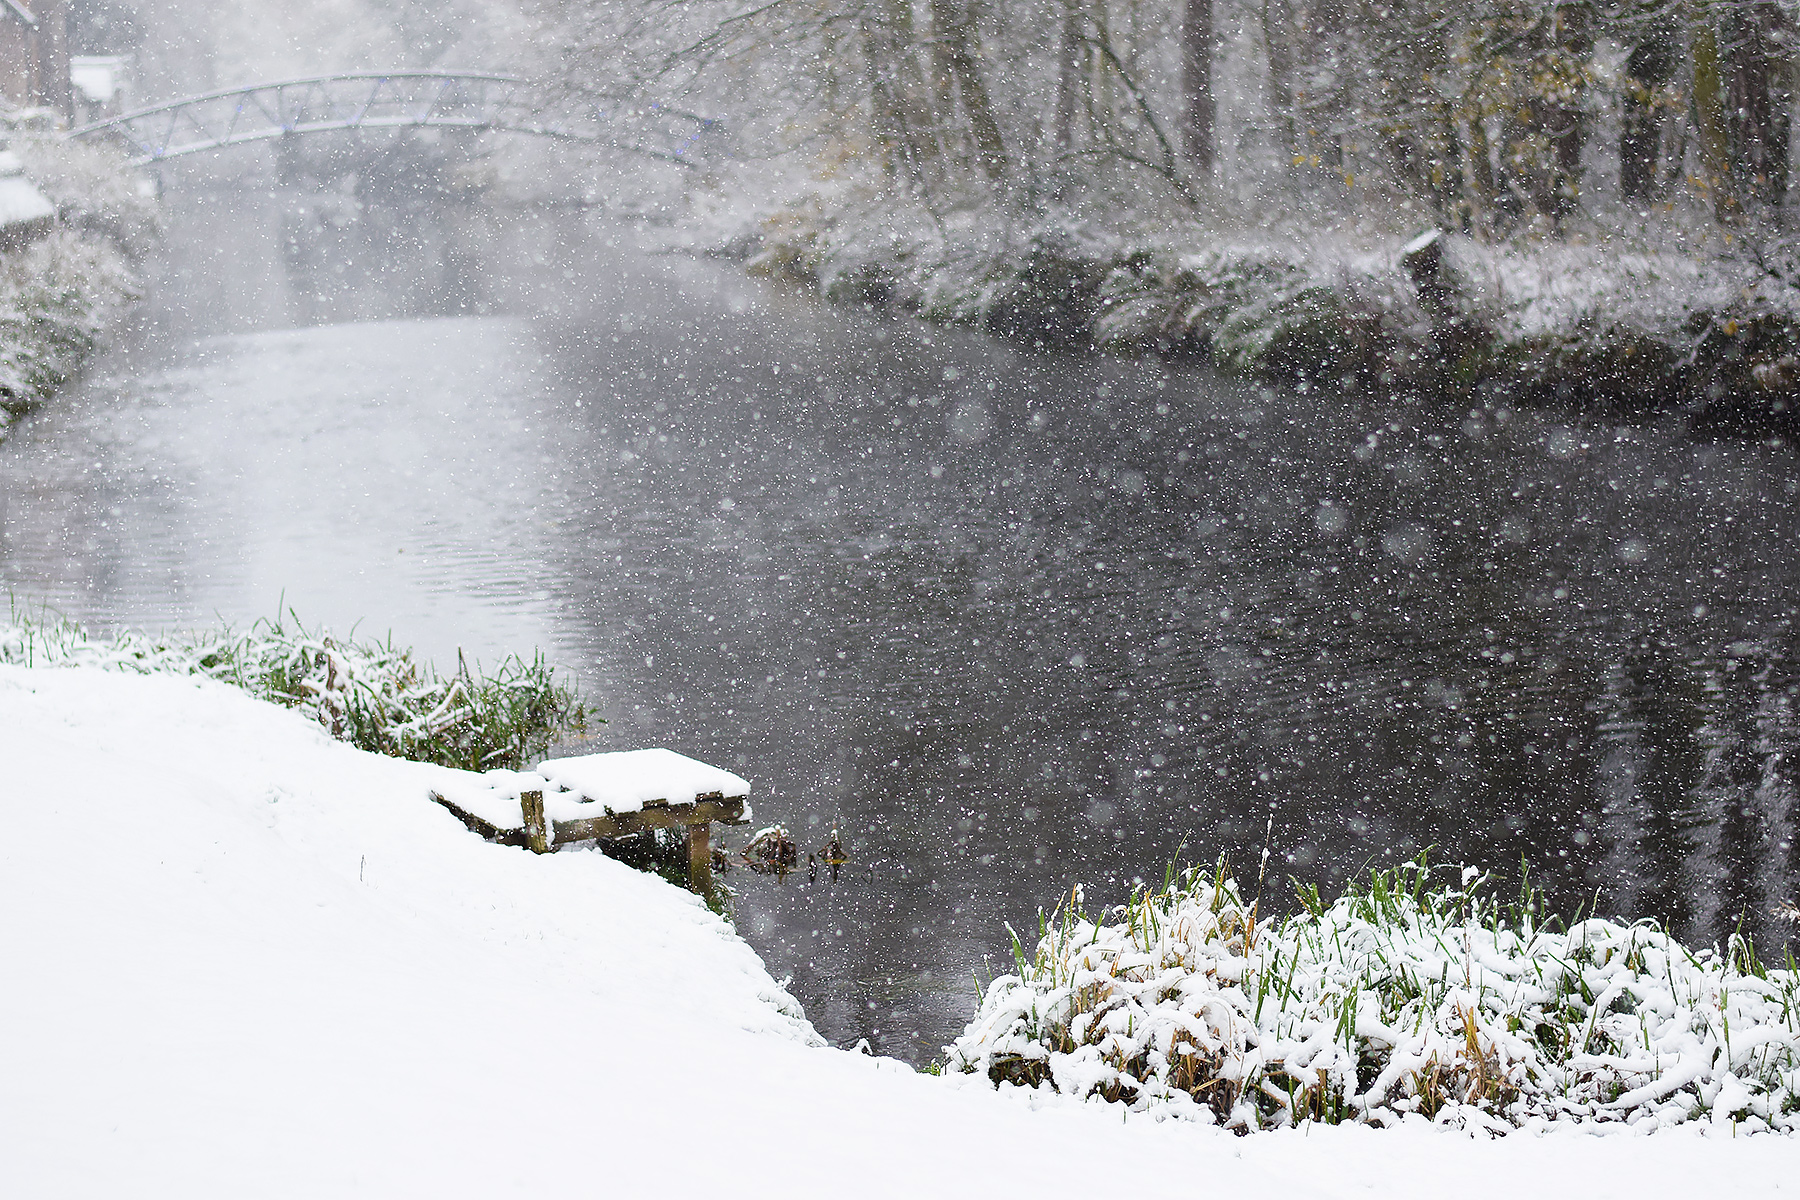 Snowy Scene By the river